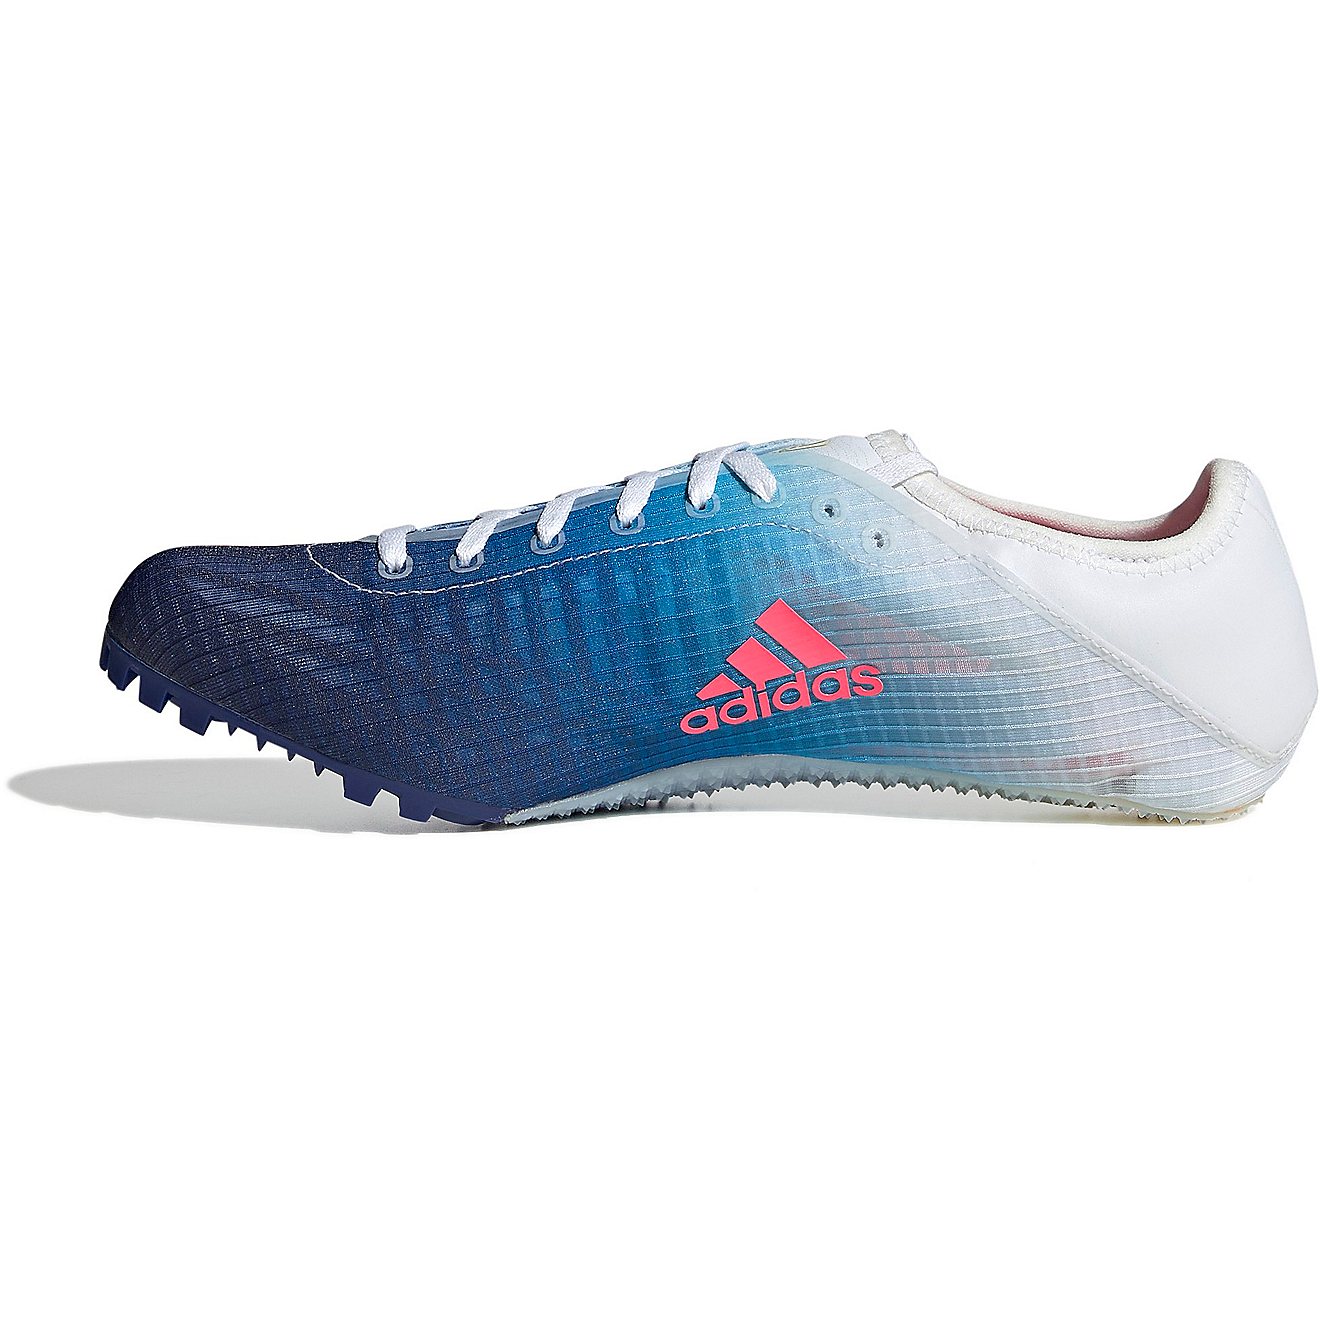 Adidas Adults' Sprintstar Track and Field Shoes                                                                                  - view number 2